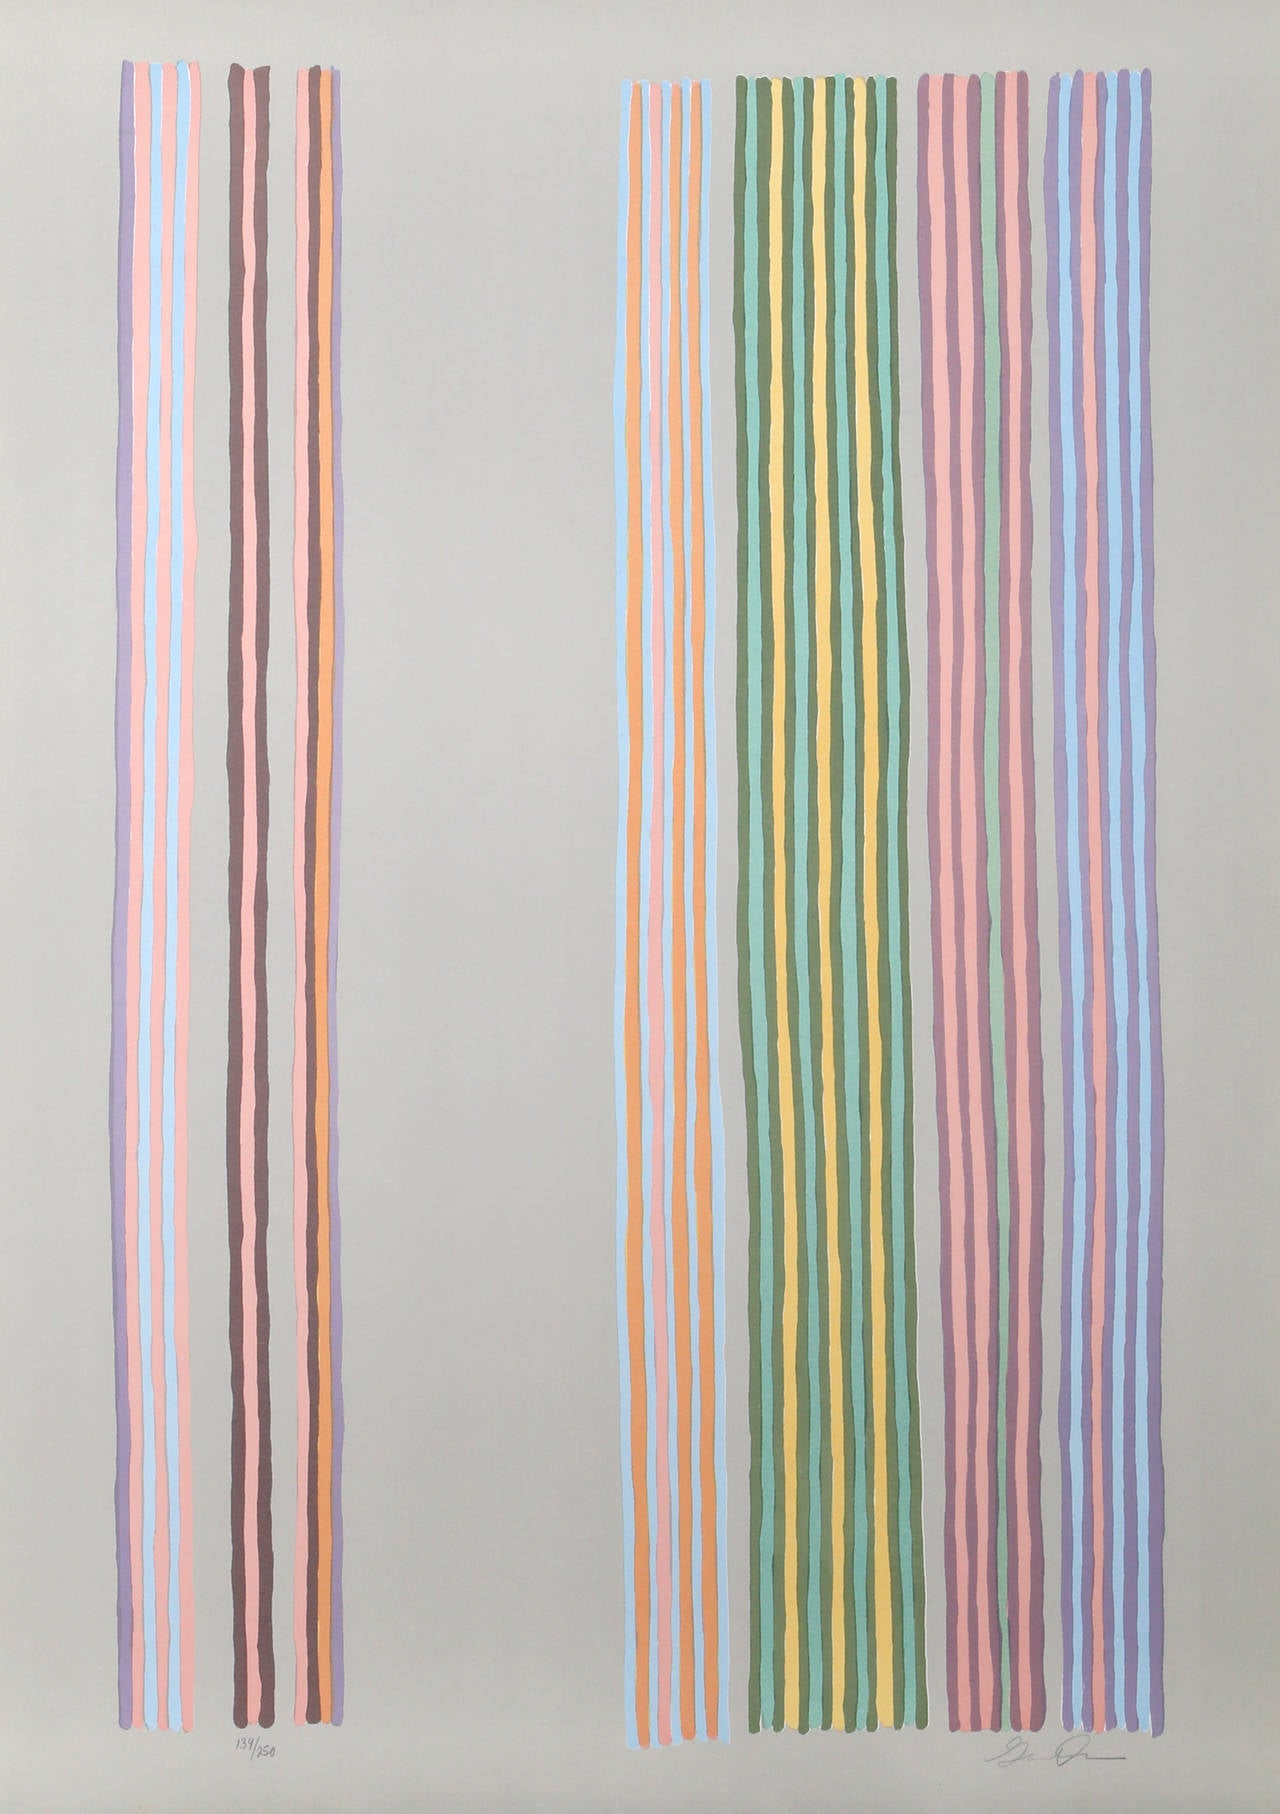 Artist: Gene Davis, American (1920 - 1985)
Title:	Royal Curtain
Year: 1980
Medium: Silkscreen in Colors on Arches, signed and numbered in pencil
Edition: 250
Paper Size: 29.75  x 21.75 in. (75.57  x 55.25 cm)